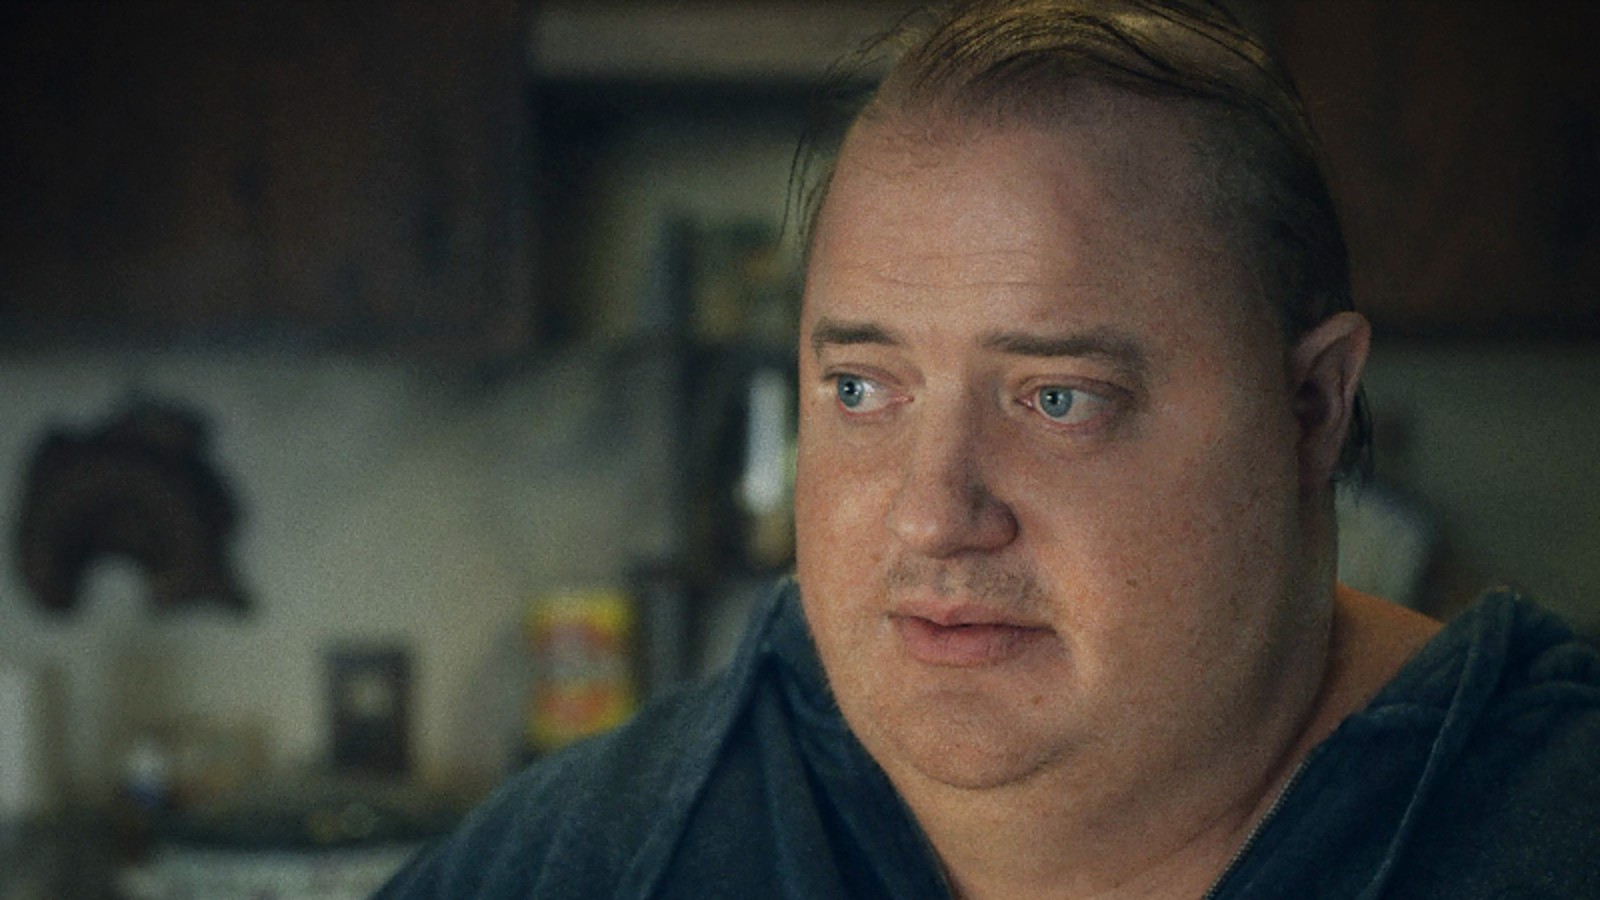 Brendan Fraser plays an obese man in A24's 'The Whale.'